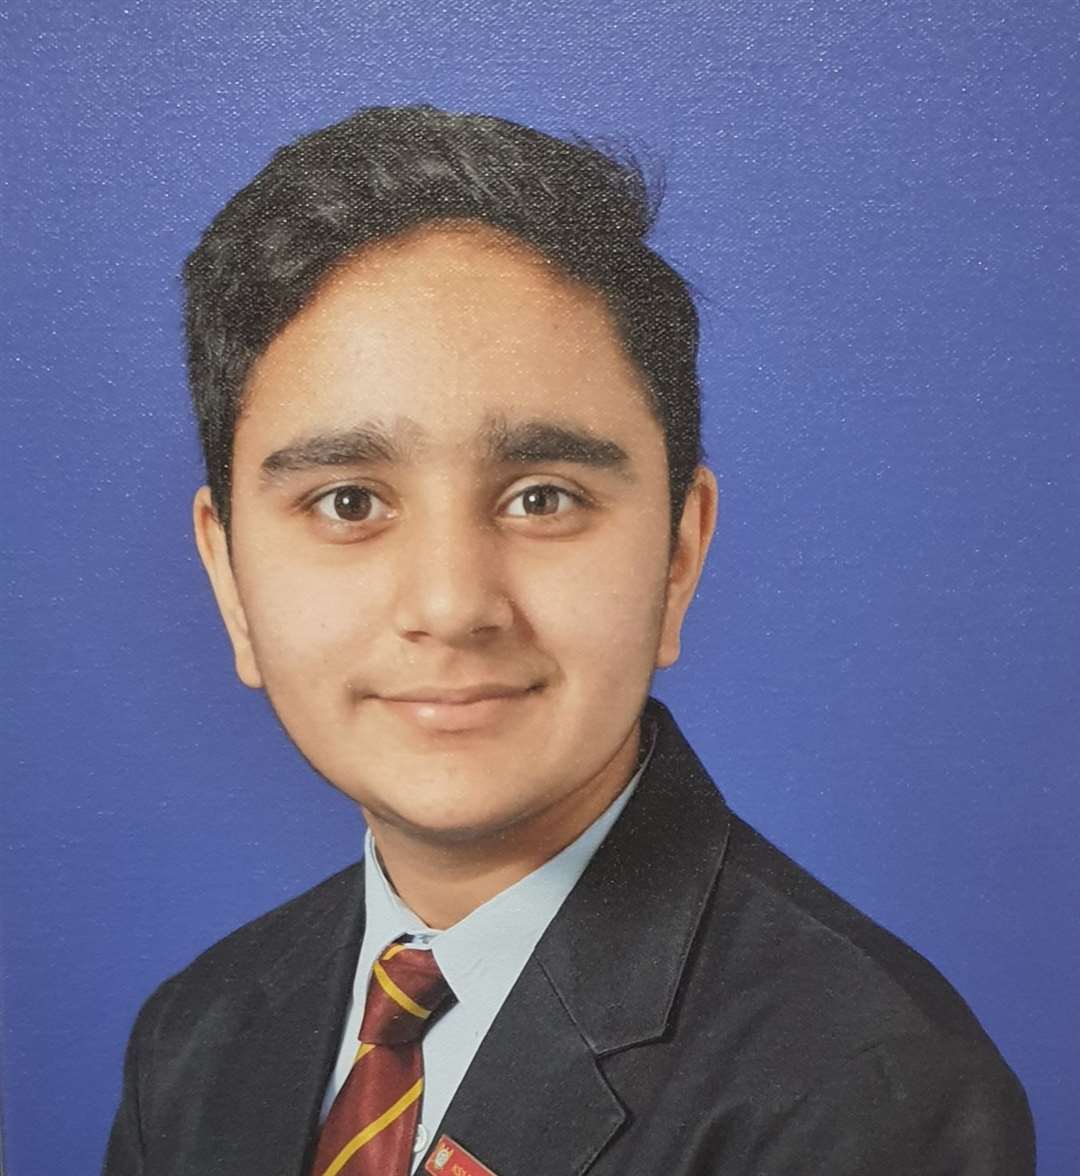 Krish Rana has been elected to serve Kent as deputy member of Youth Parliament